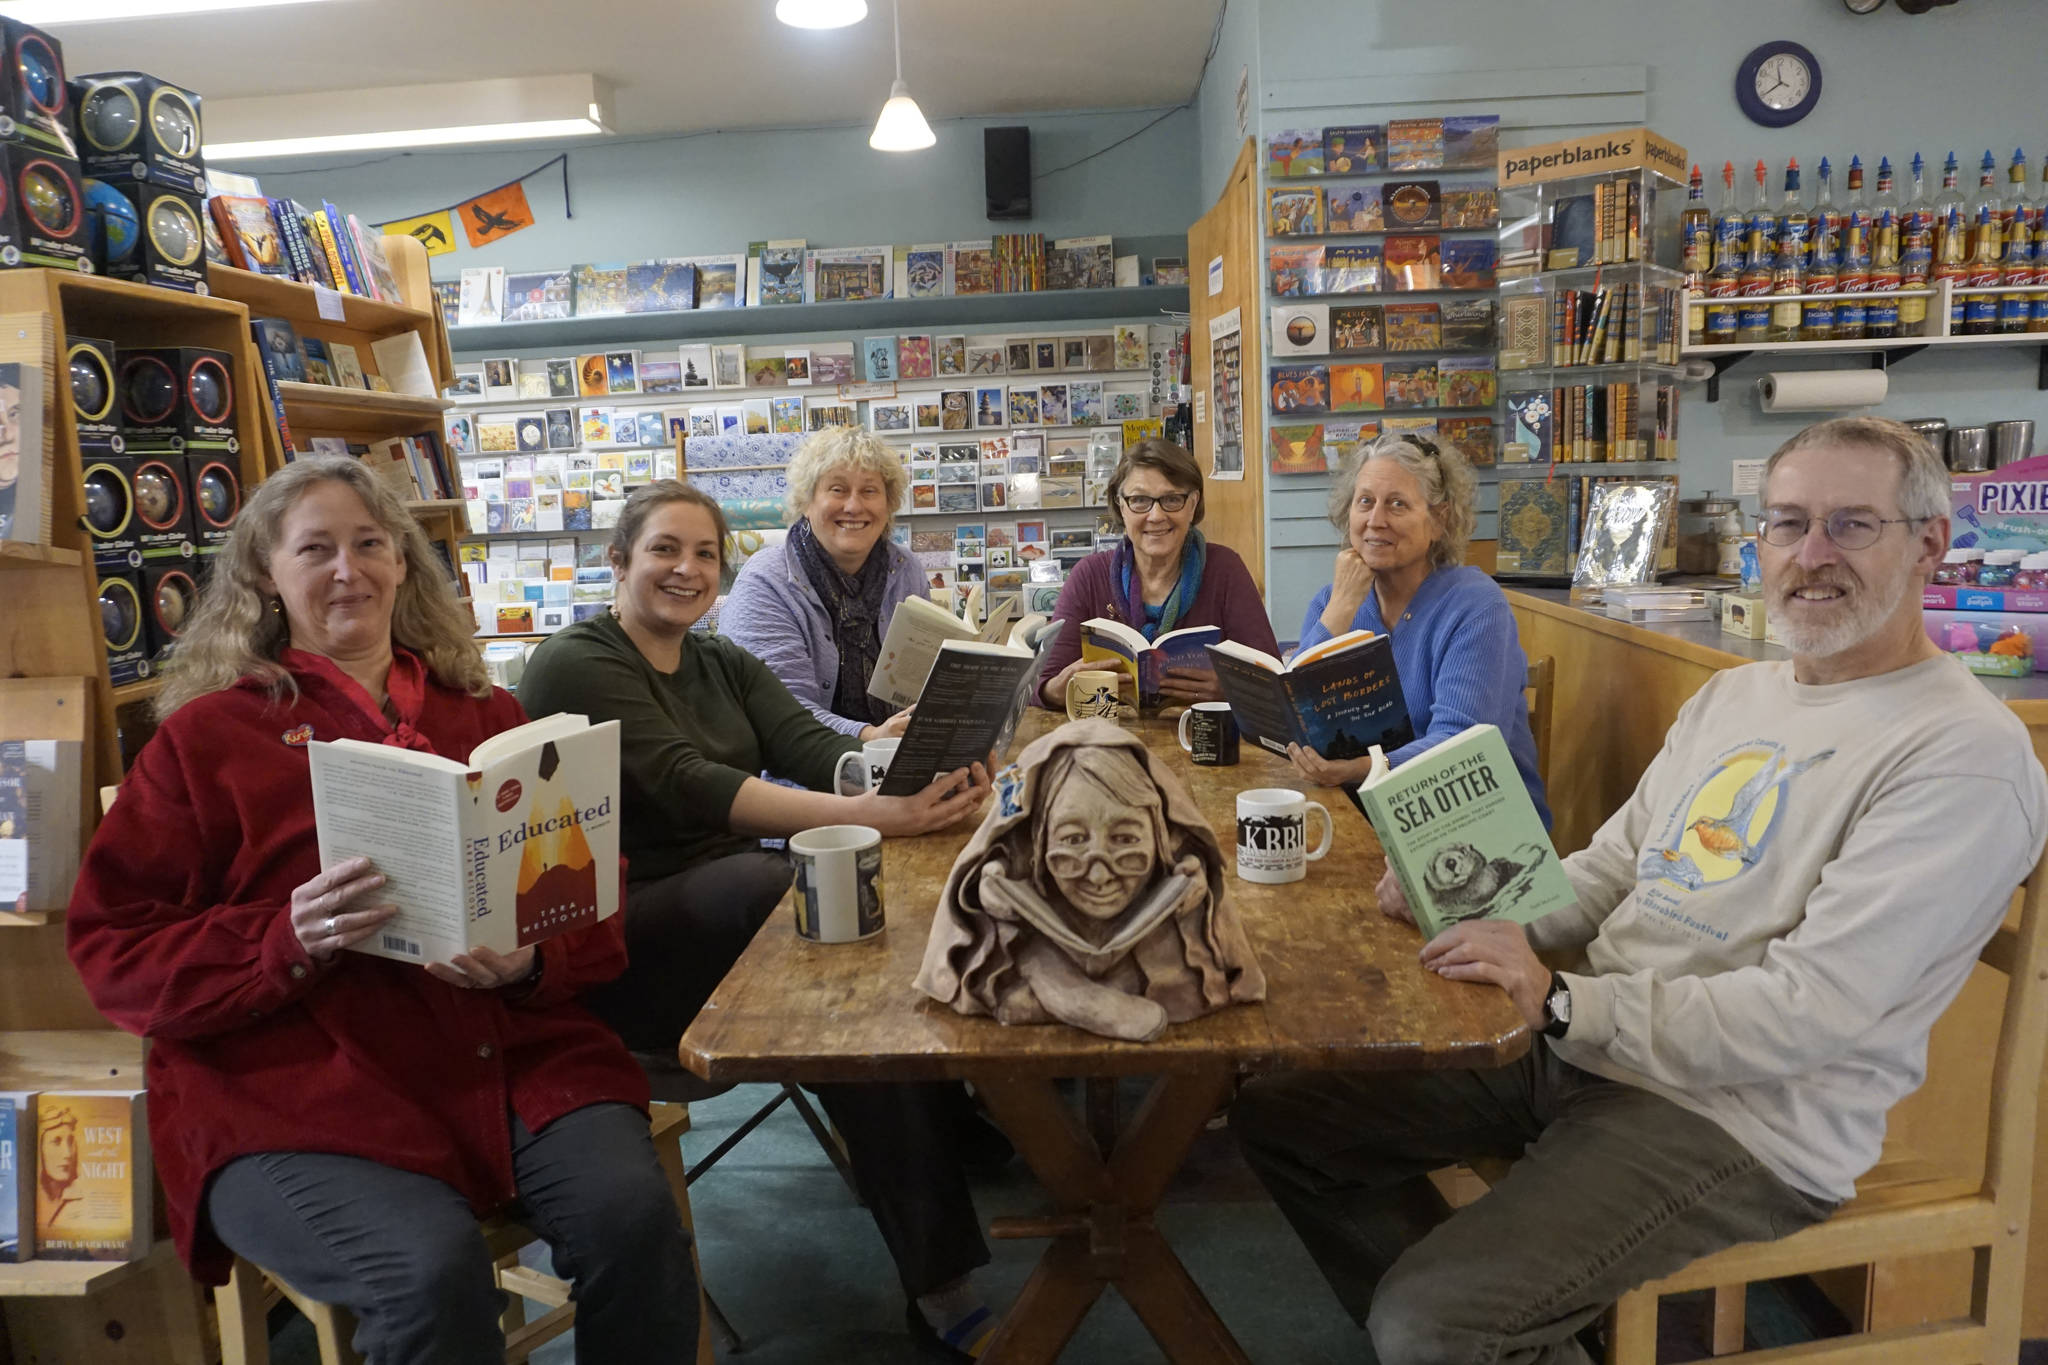 The staff and partners in the Homer Bookstore pose for a photo in the store’s cafe in Homer, Alaska, on Oct. 29, 2018. From left to right are Sue Post, partner; Jennifer Norton, staff; Jennifer Stroyeck, partner; Nancy Vait, staff; Sara Reinert, staff; and Lee Post, partner. The sculpture on the table is of bookstore matriarch Joy Post, mother of Sue and Lee Post, and was sculpted by artist Barbara Jo Auburn House. (Photo by Michael Armstrong/Homer News)